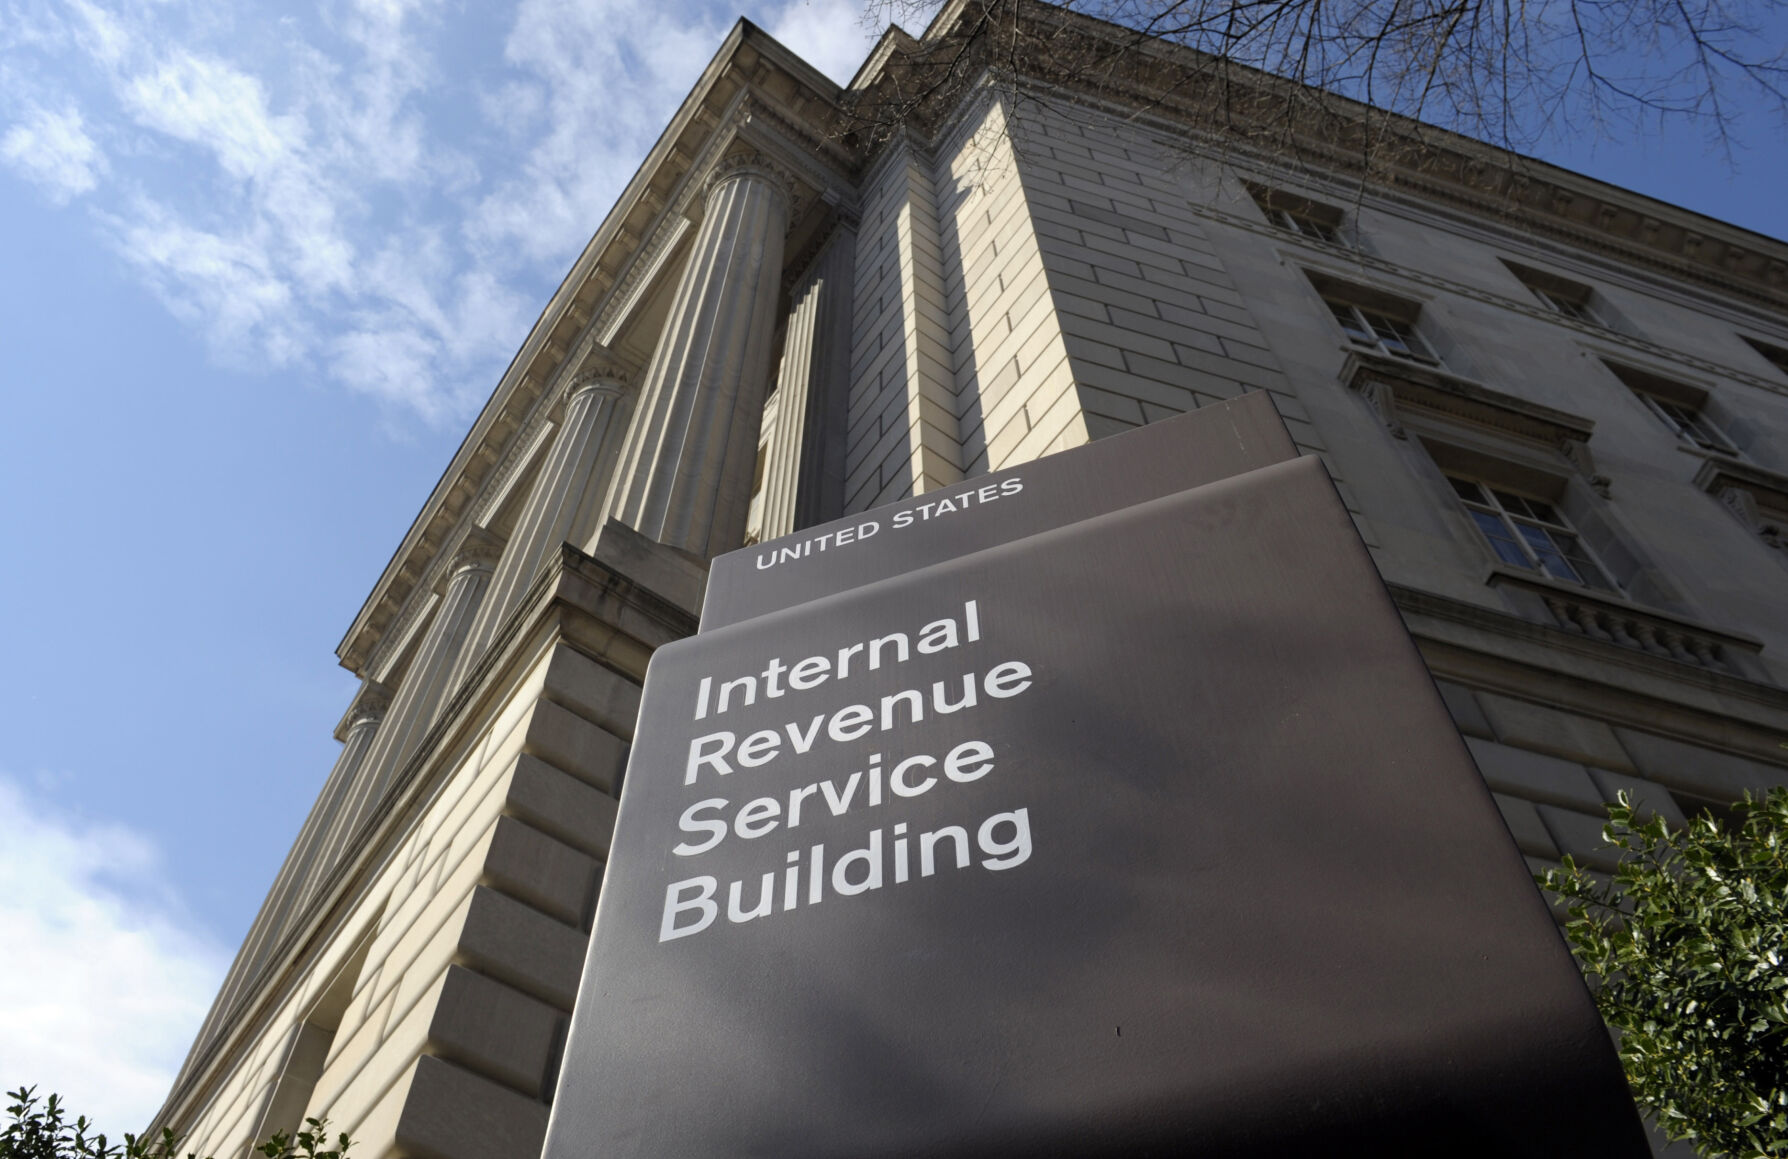 <p>FILE - The exterior of the Internal Revenue Service (IRS) building in Washington on March 22, 2013. The IRS says it has collected an additional $360 million in overdue taxes from delinquent millionaires, as agency leadership tries to promote the latest work its done to modernize the agency with Inflation Reduction Act funding. (AP Photo/Susan Walsh, File)</p>   PHOTO CREDIT: Susan Walsh - staff, ASSOCIATED PRESS